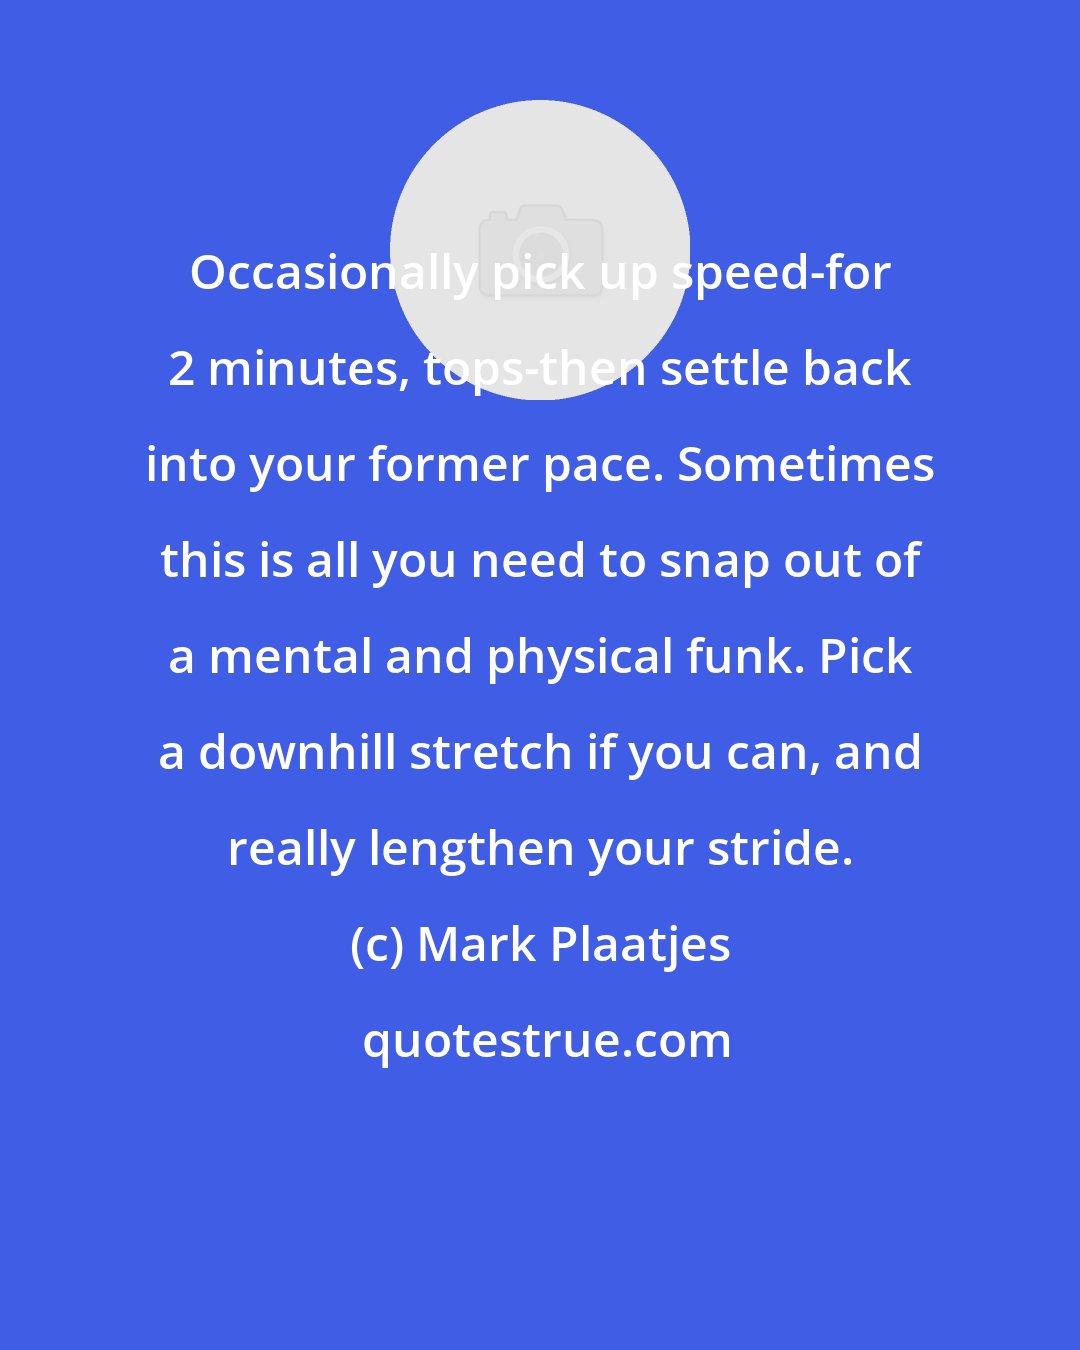 Mark Plaatjes: Occasionally pick up speed-for 2 minutes, tops-then settle back into your former pace. Sometimes this is all you need to snap out of a mental and physical funk. Pick a downhill stretch if you can, and really lengthen your stride.